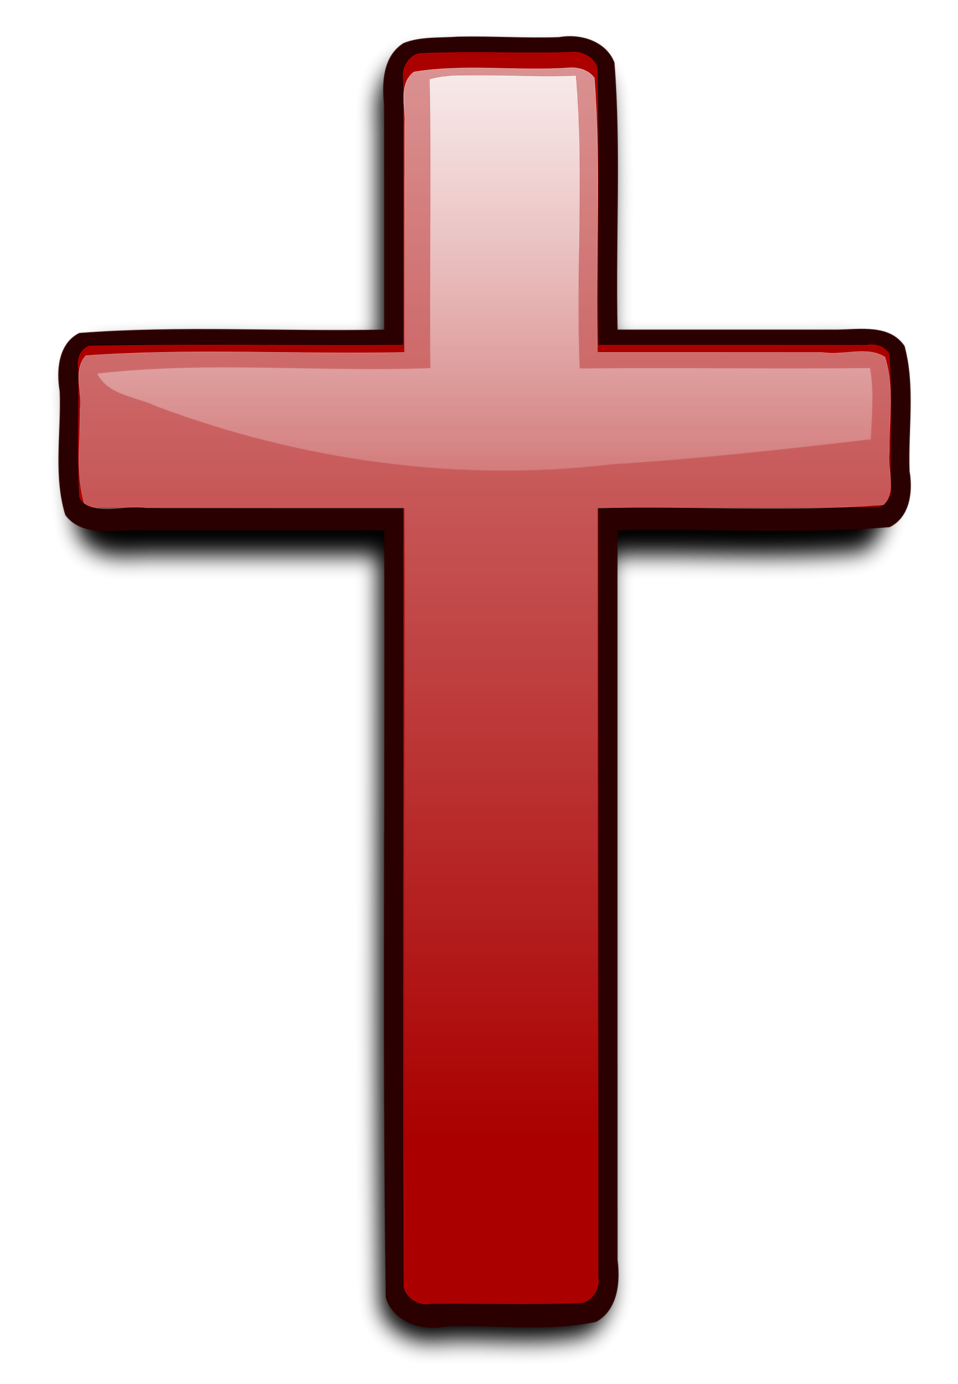 Christian Red Cross Symbol - Clipart library